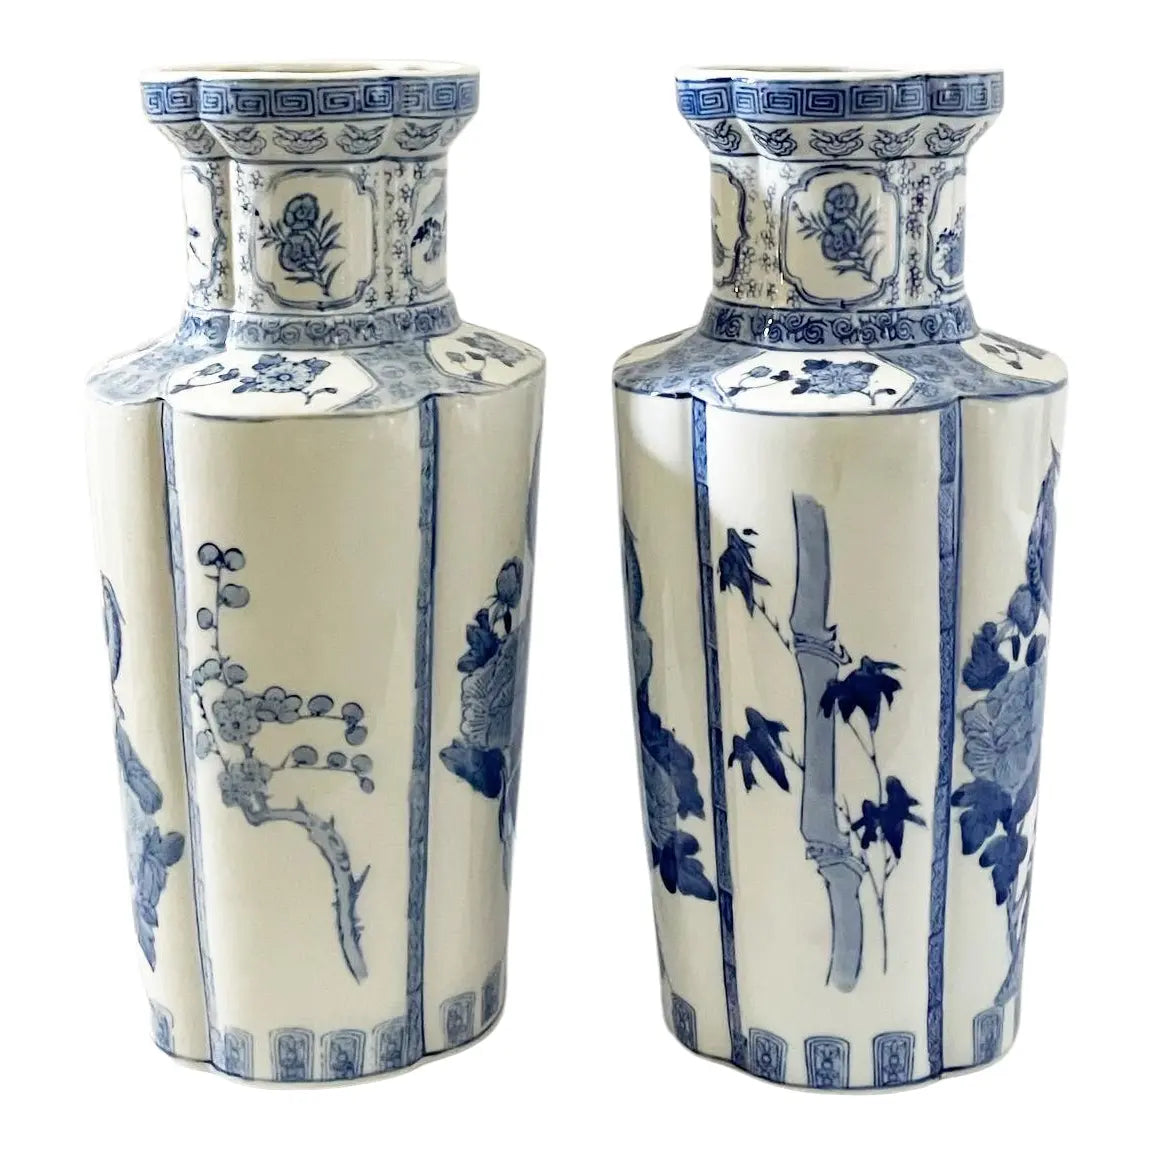 Large Blue and White Chinoiserie Vases With Peacocks - Set of 2